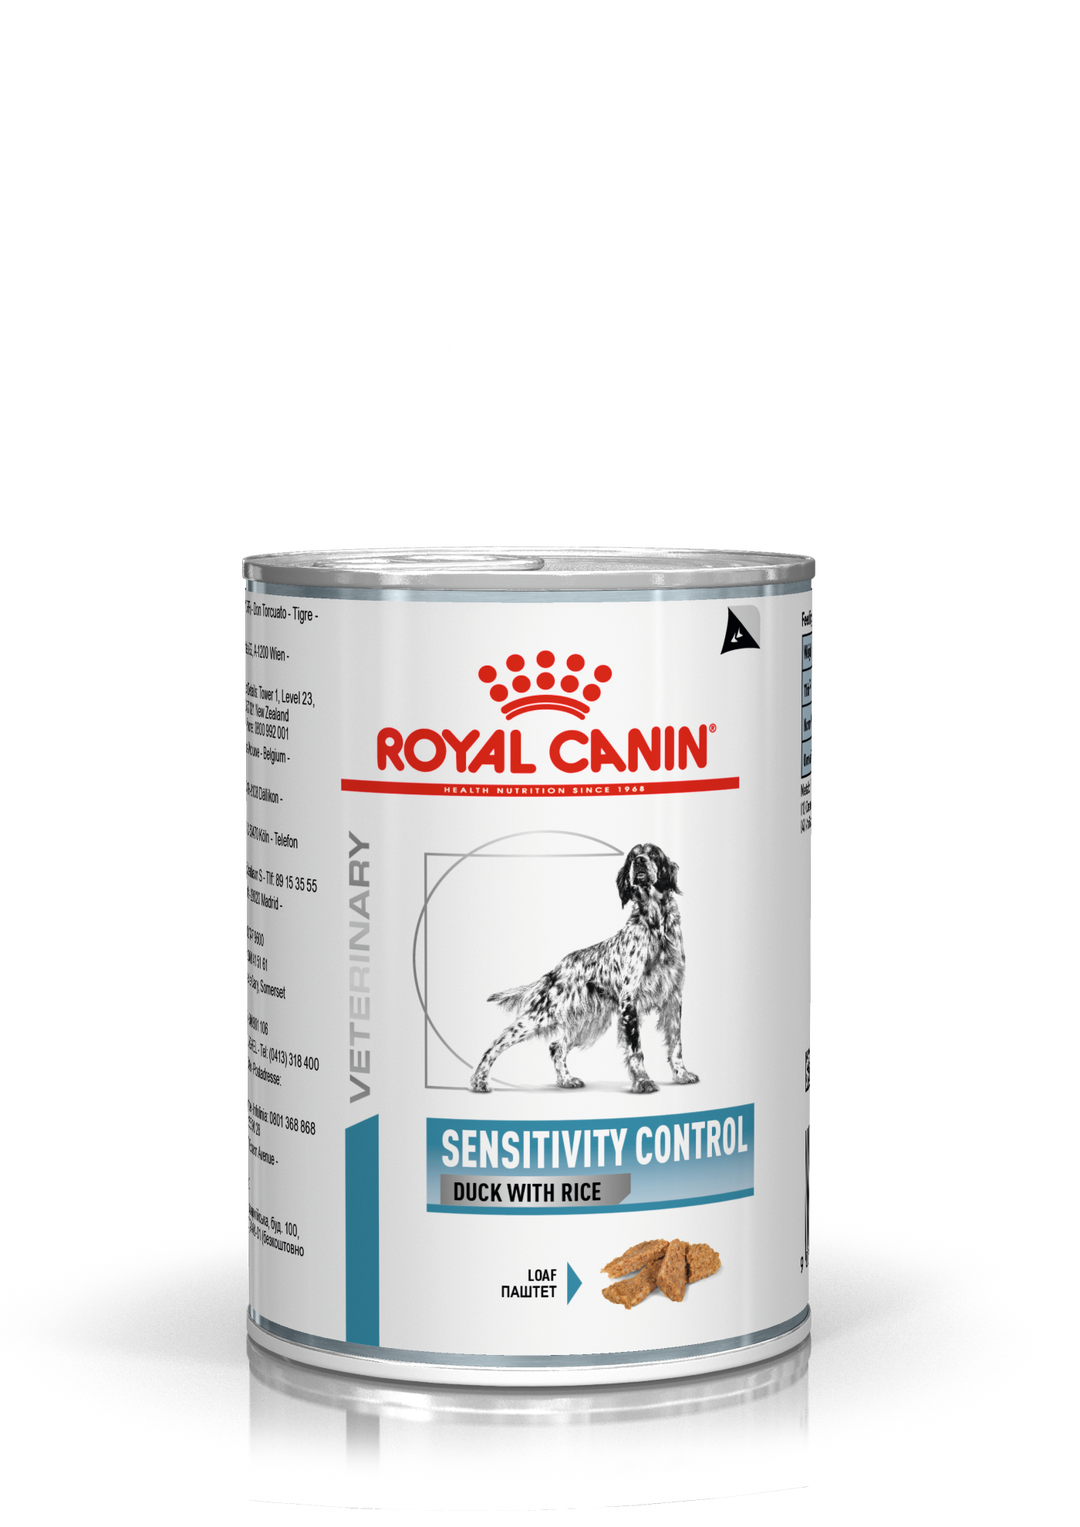 Royal Canin Sensitivity Control Duck and Rice for Dogs Canned